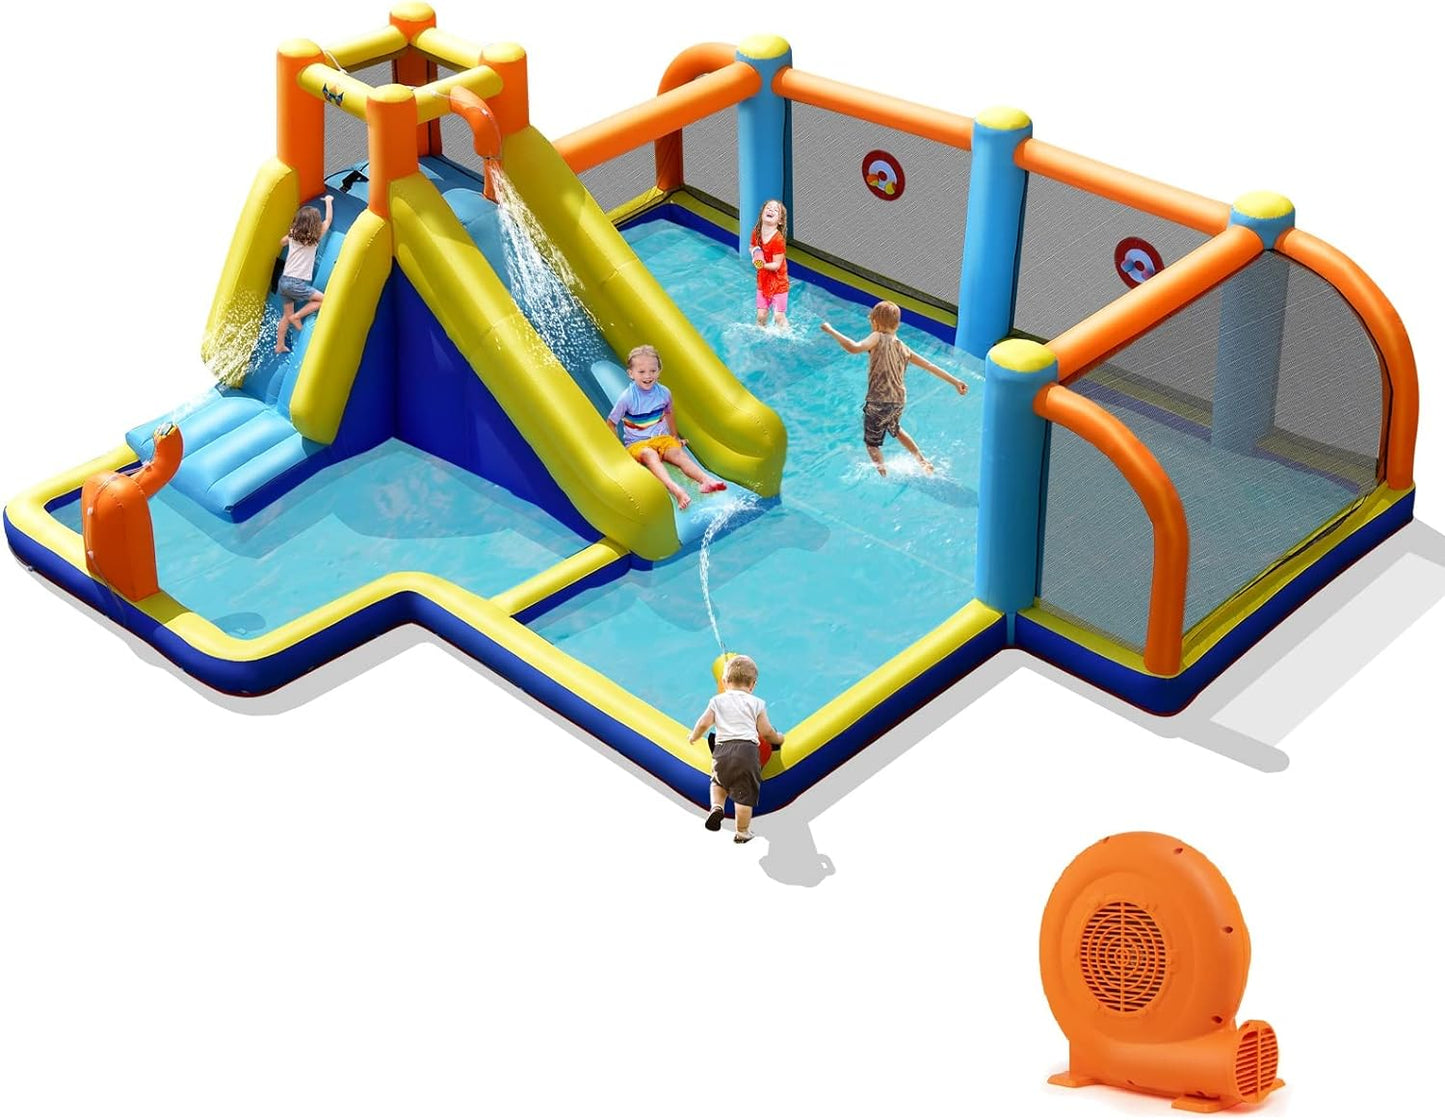 Inflatable Water Slide Park, 9 in 1 Mega Waterslide Bounce House for Outdoor W/Dual Slides, Giant Splash Pool, 735W Blower, Water Slides Inflatables for Kids and Adults Backyard Party Gifts